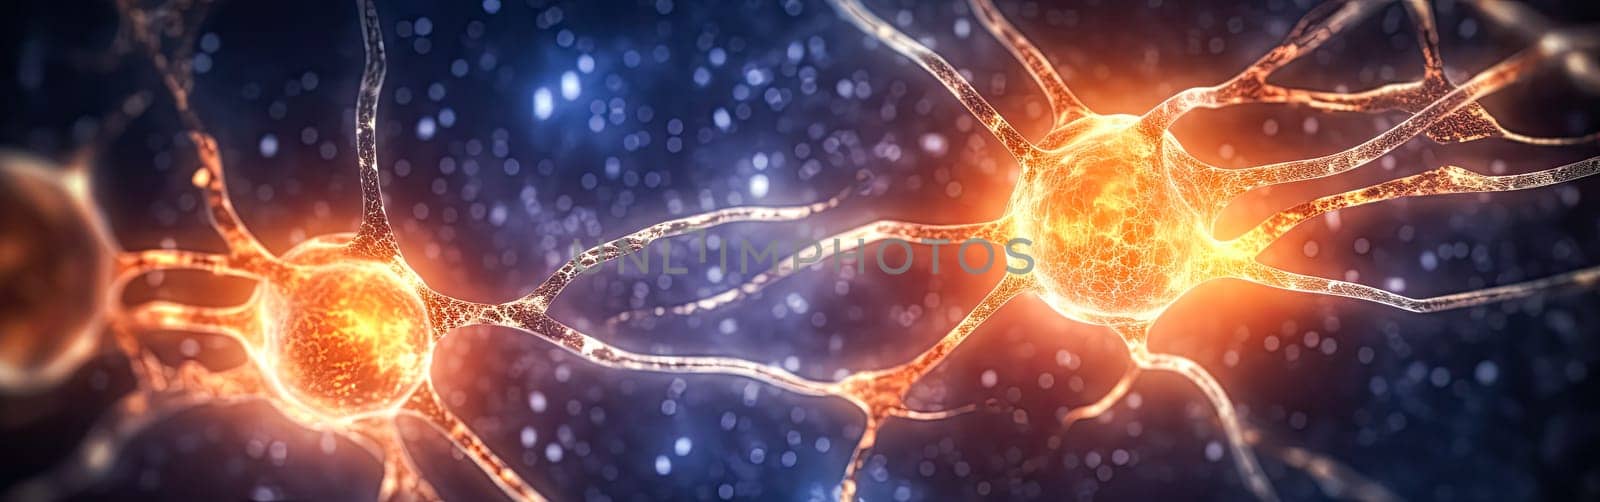 An intricate depiction of neuron activity, showcasing synapses and axons transmitting electrical signals within the brain's neural network.